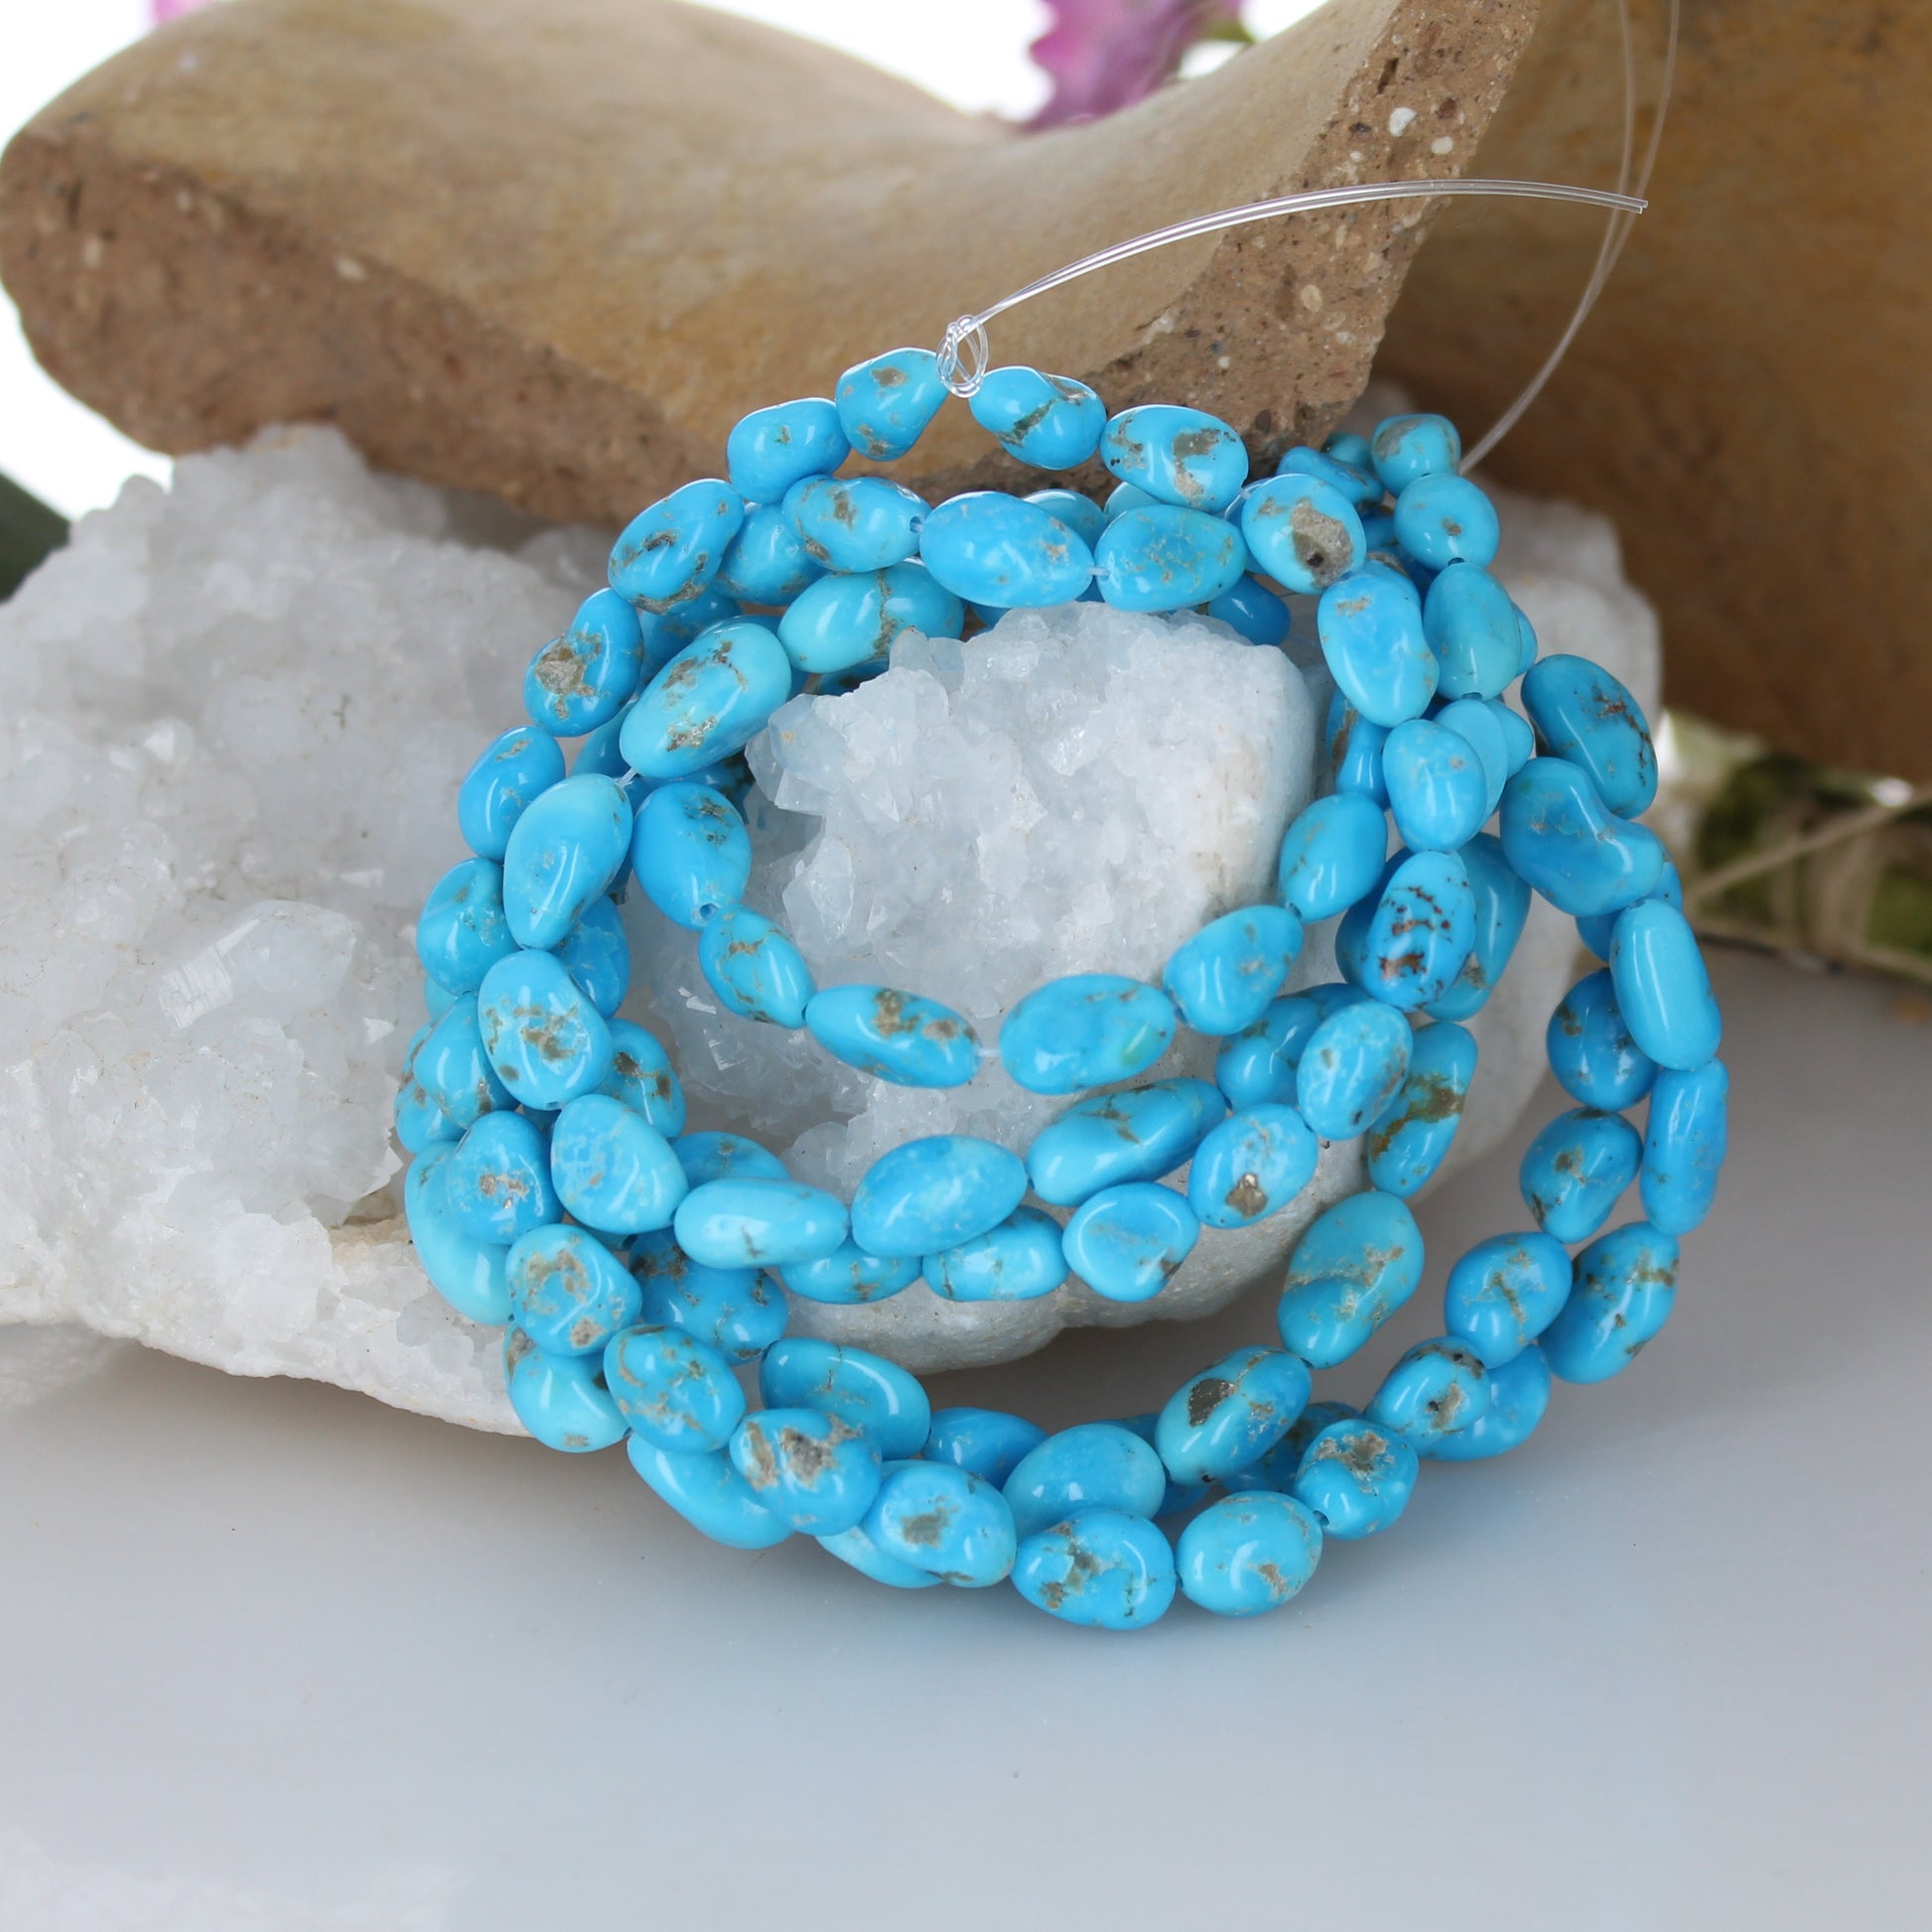 Castle Dome Turquoise Beads Bright Blue 9-13mm -NewWorldGems